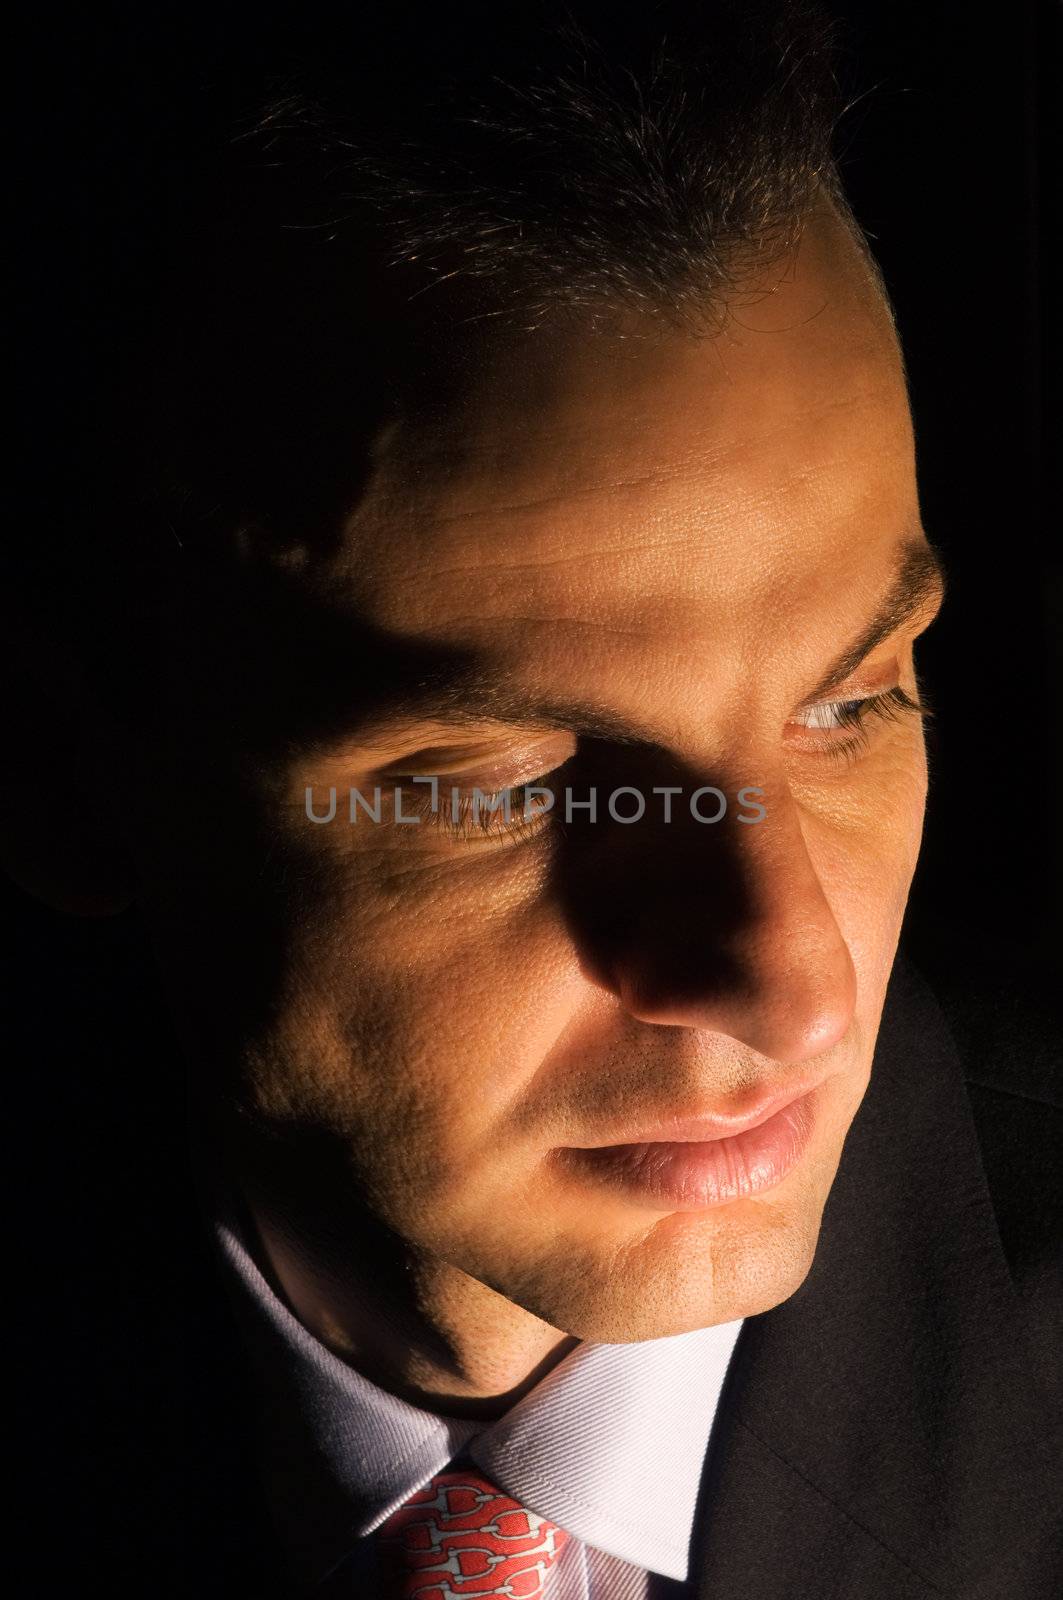 Portrait of a young businessman under dramatic lighting